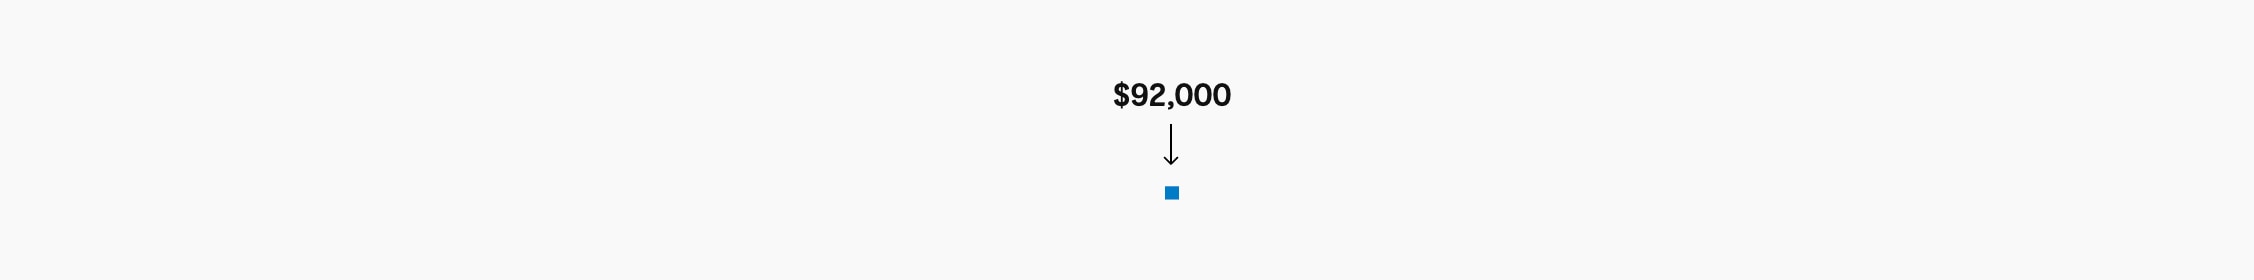 Small dot labelled "$92,000"